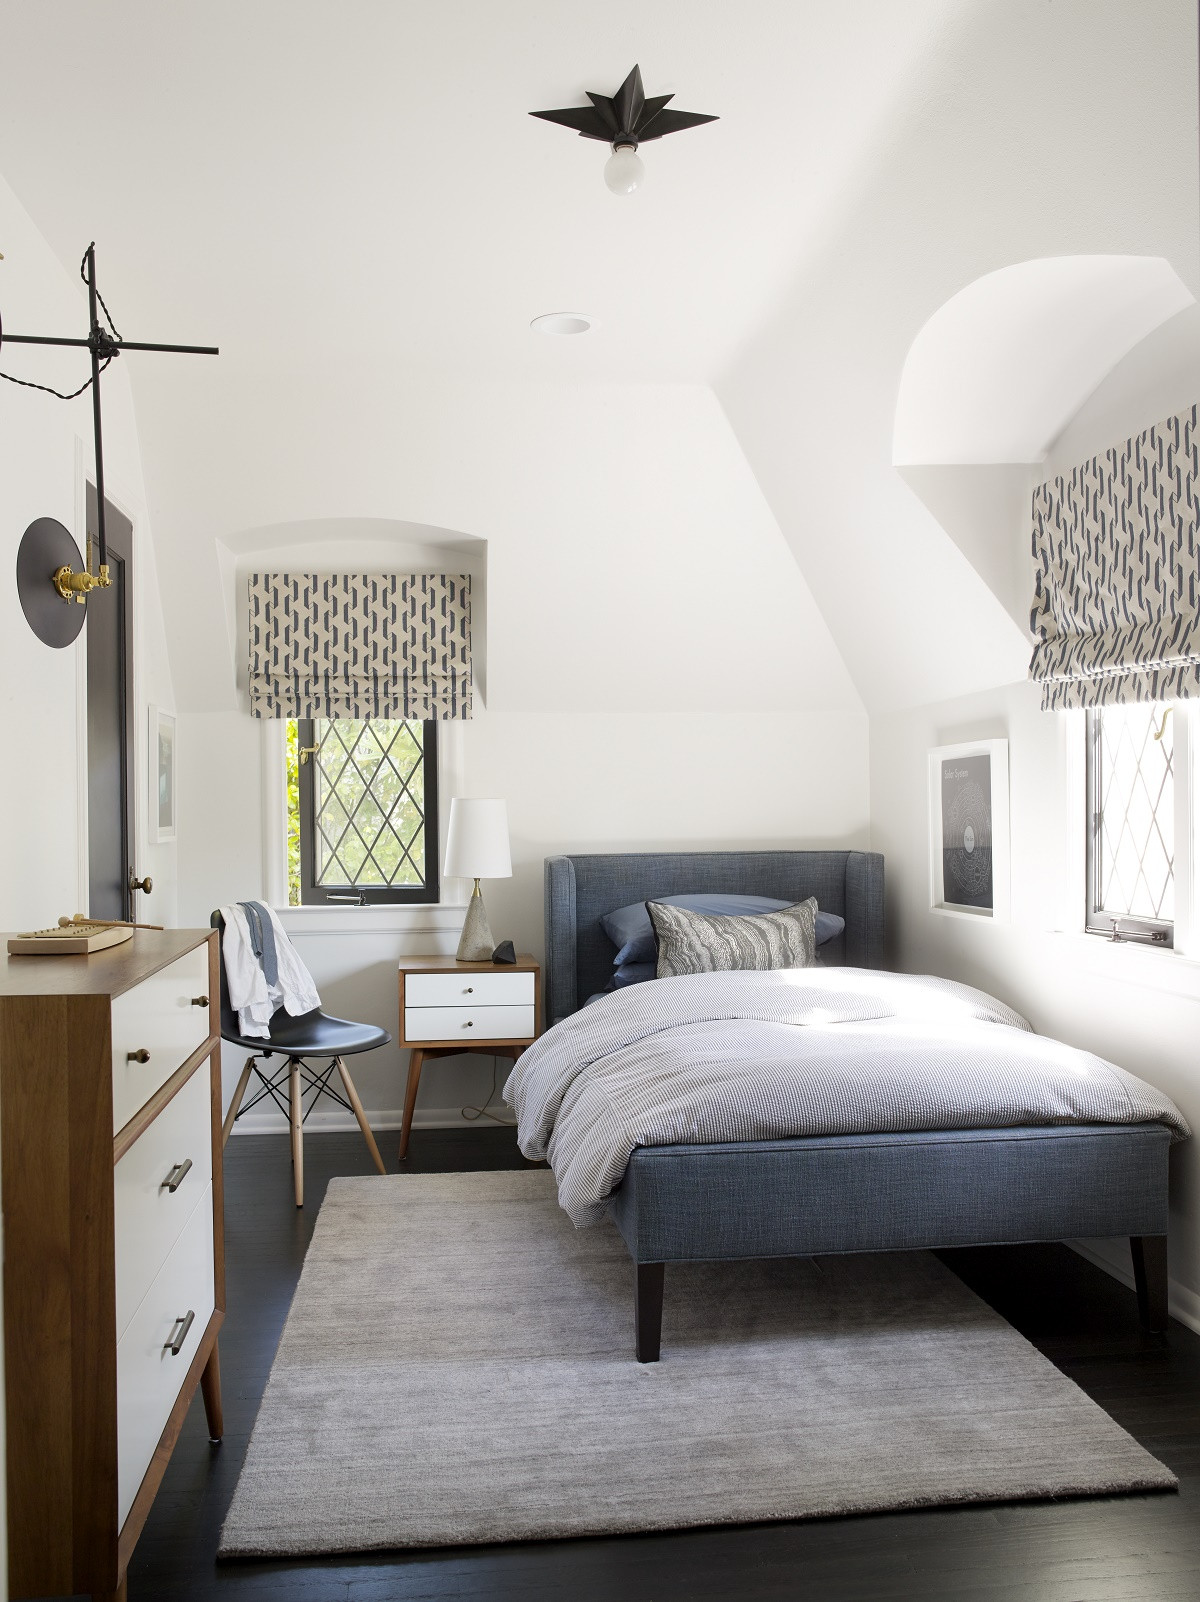 Modern Bedroom Ideas Pinterest
 Steal This Look His and Hers Mid Century Inspired Kids